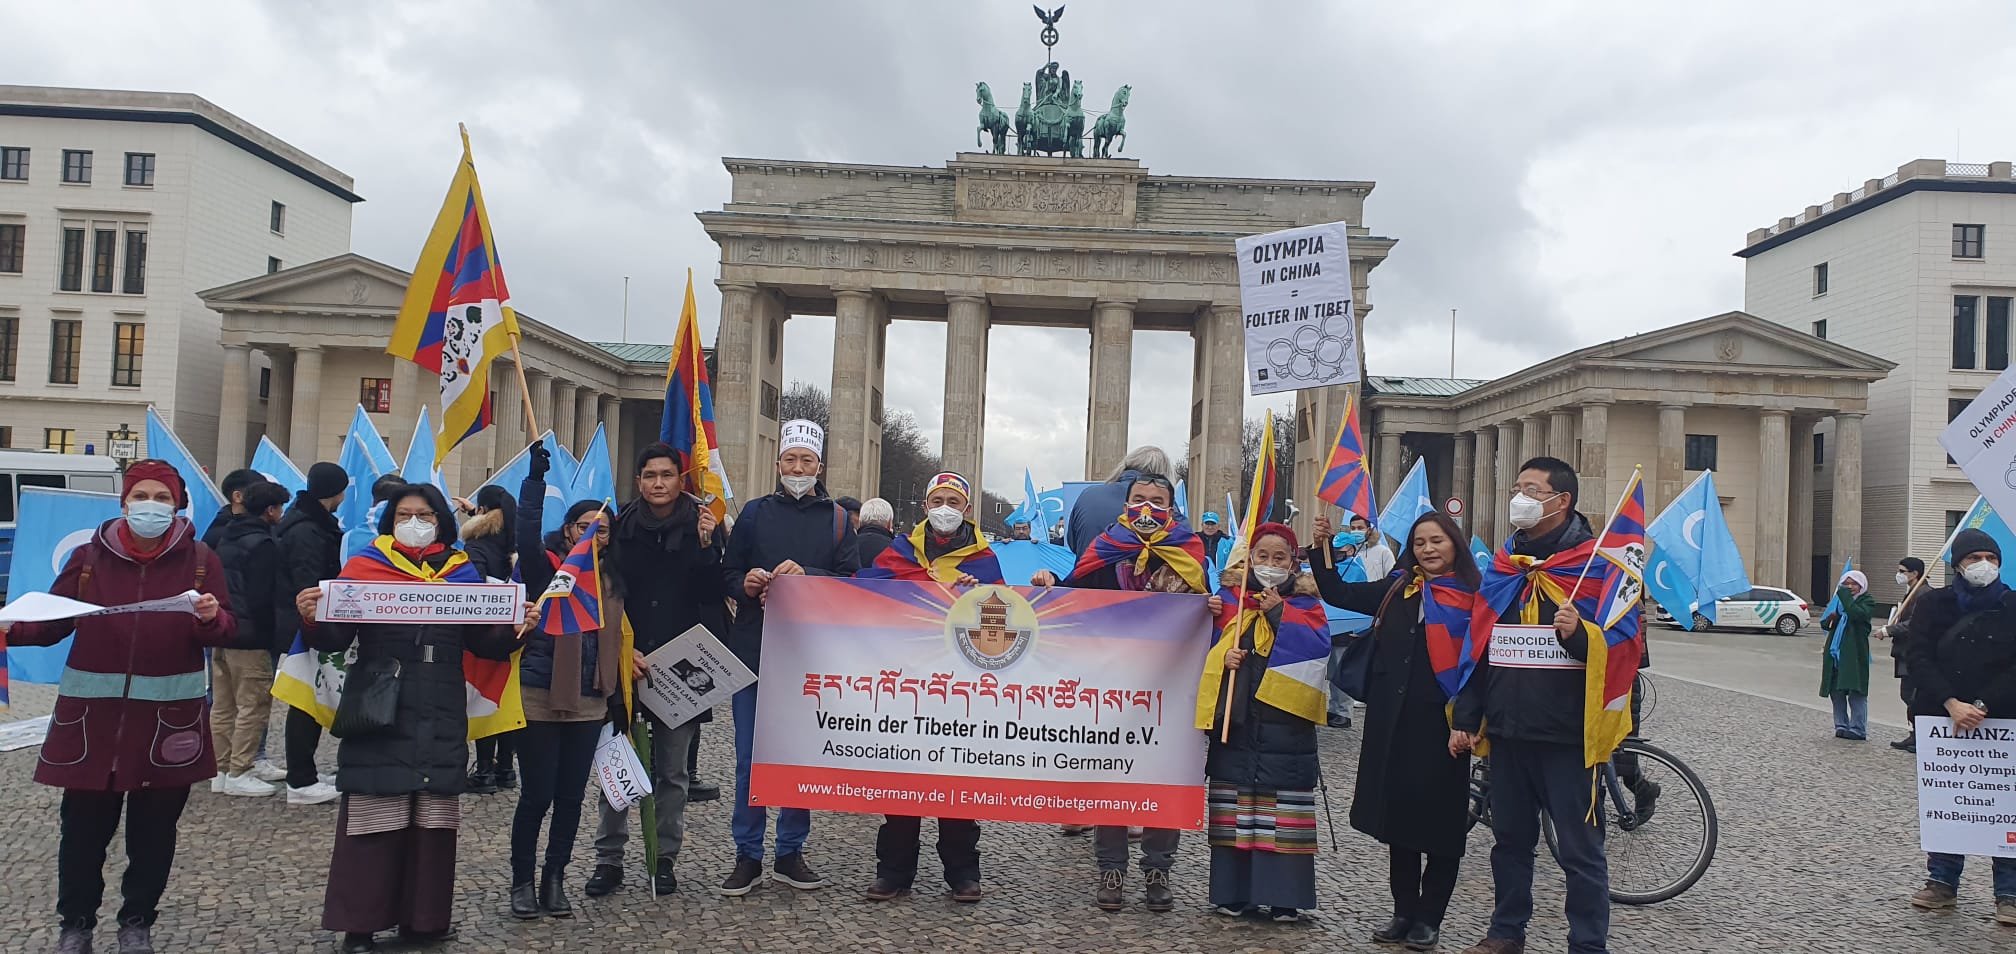 Tibetan Association in Germany along with Tibet groups and called for diplomatic boycott of Beijing Olympic games 2022 2 Tibetan Communities in Switzerland and Germany Call for Diplomatic Boycott of Beijing Olympics 2022